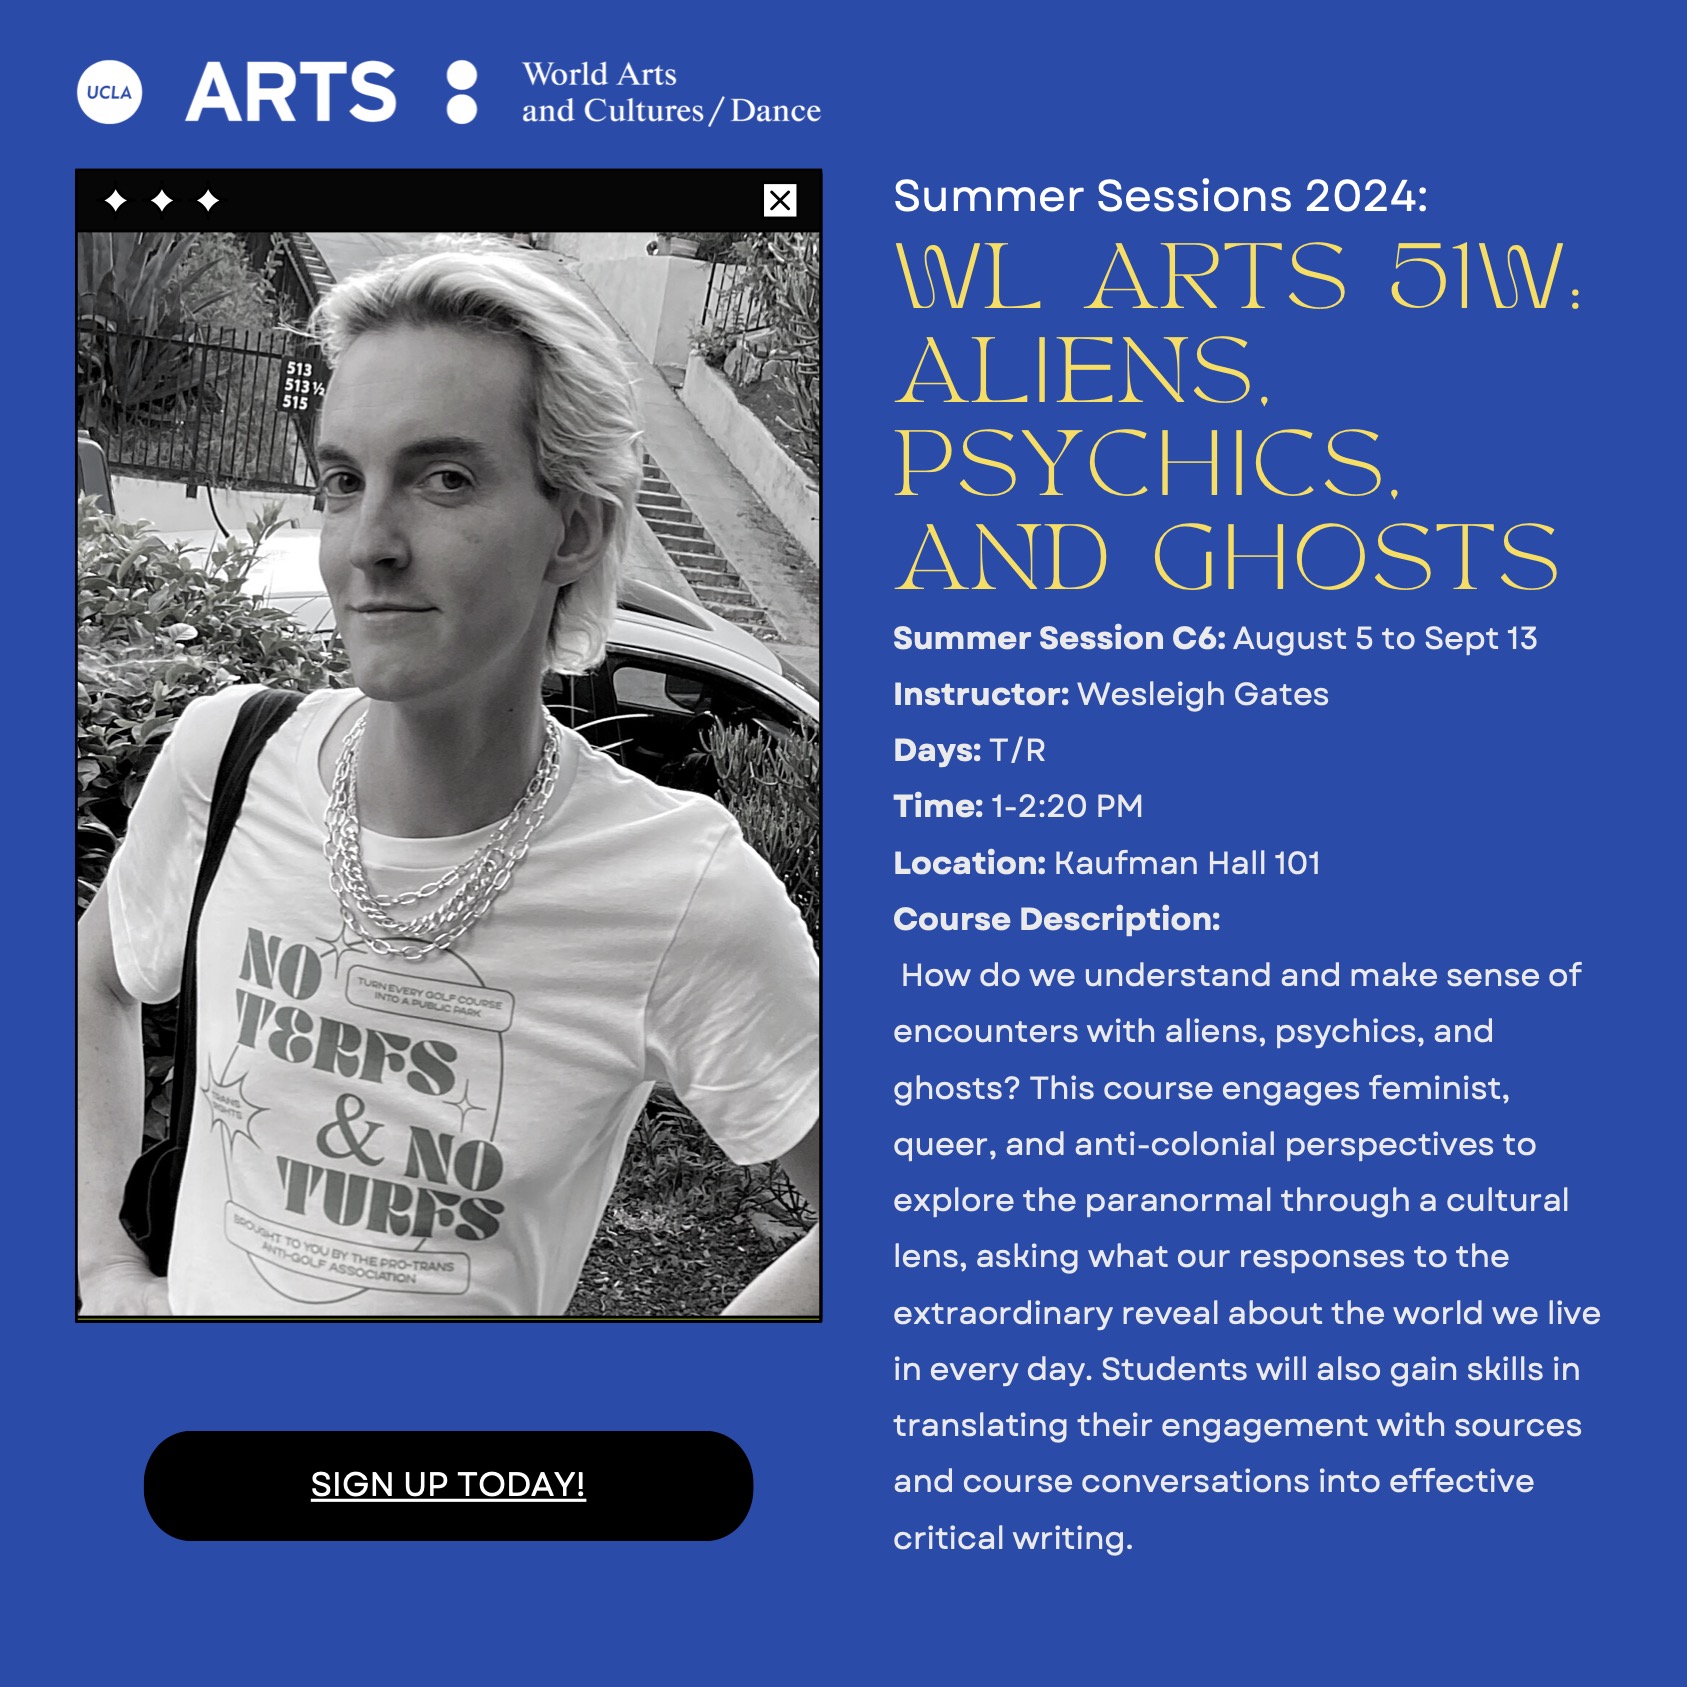 WL ARTS 51: Alien, Psychics, and Ghosts